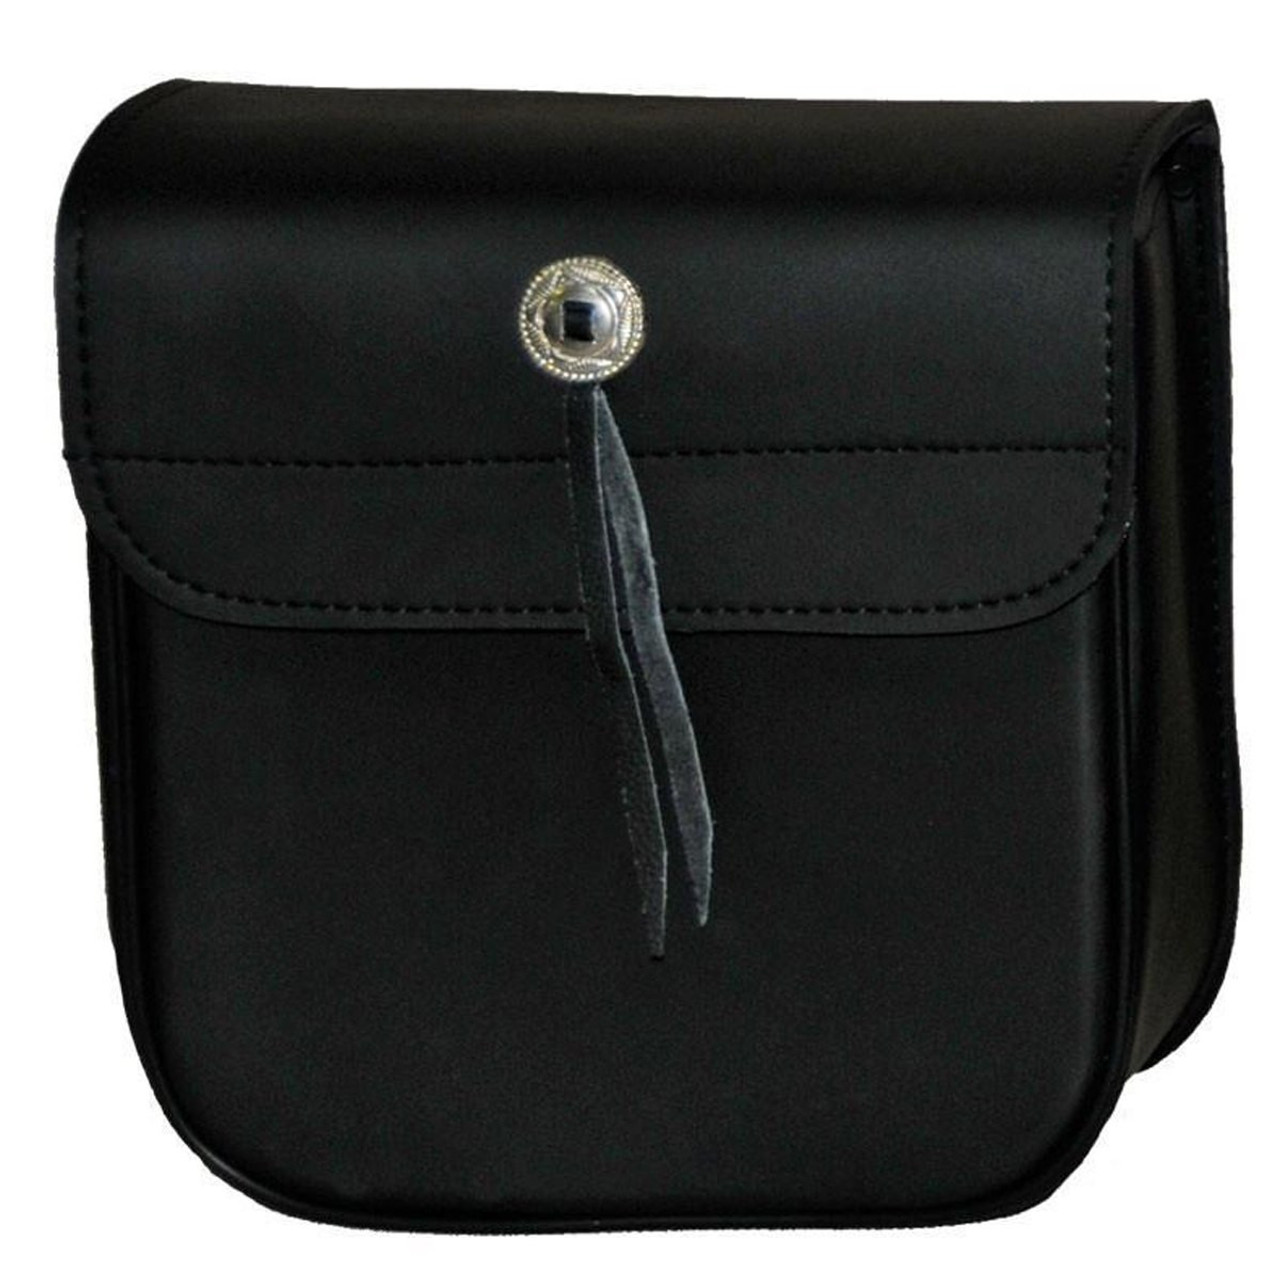 Buy the Harley Davidson Black Leather Small Pouch Flap Crossbody